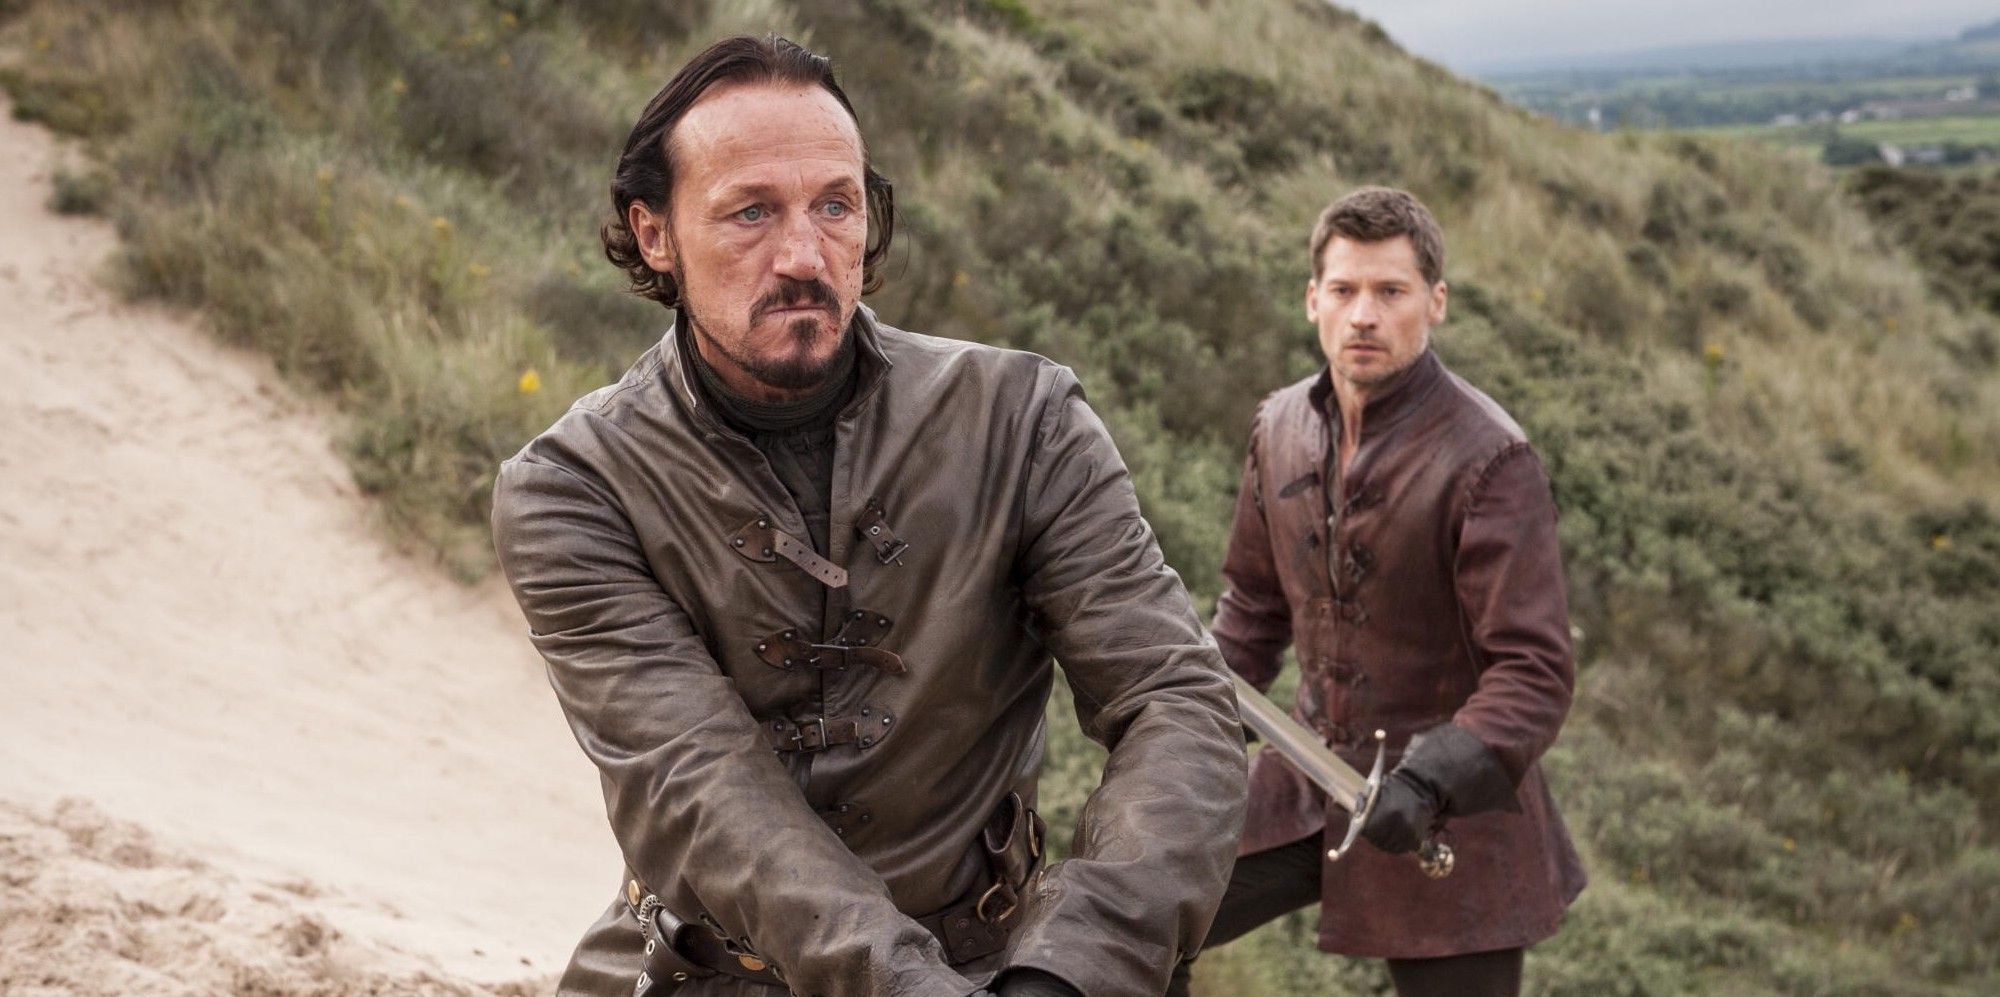 Bronn and Jaime pursuing something in Game of Thrones.